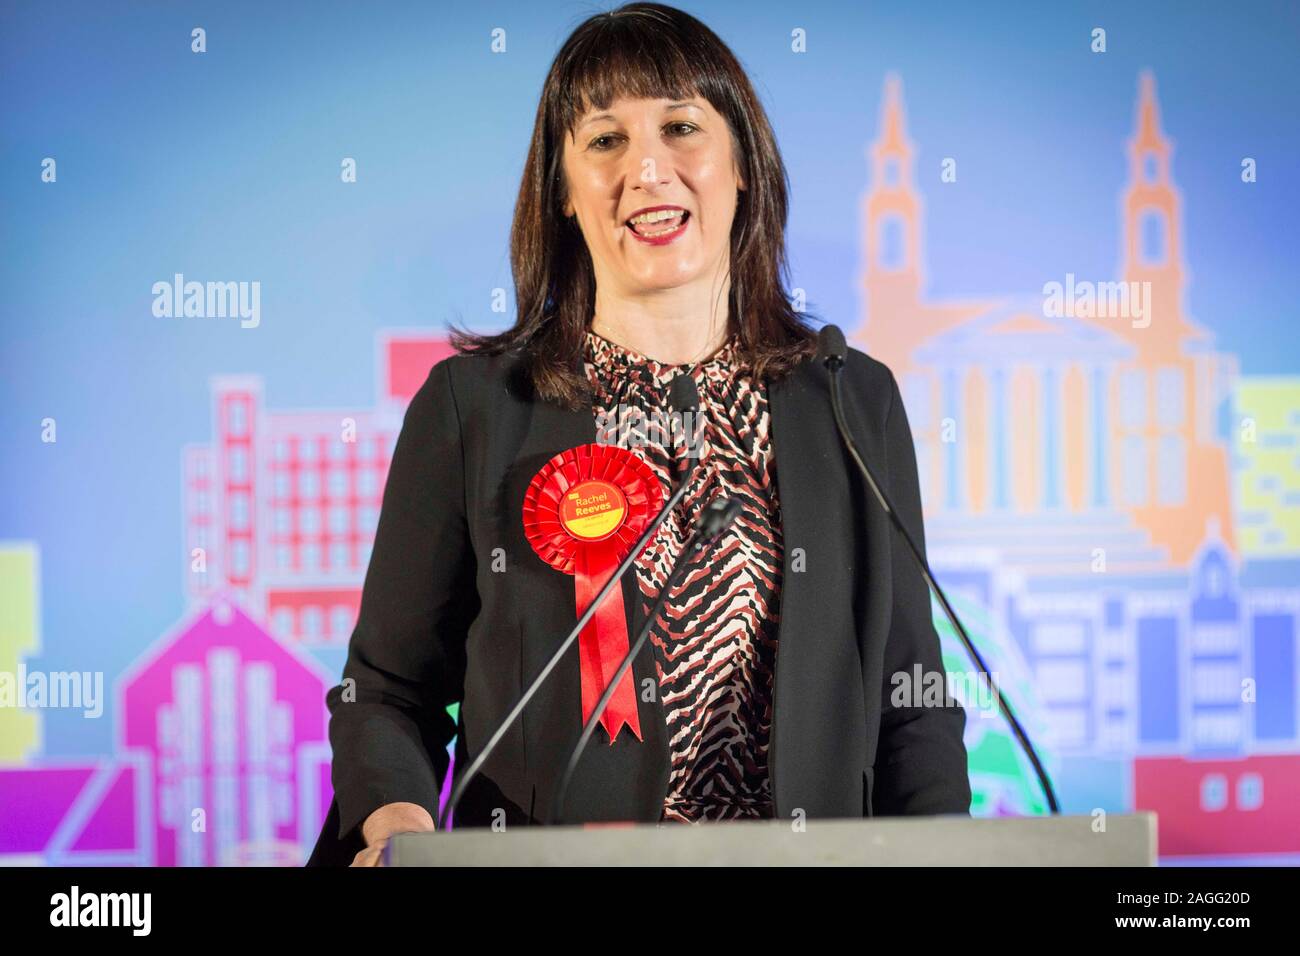 Picture by Chris Bull   13/12/19 General Election 2019 count and results at Leeds Arena. Rachel Reeves , Labour   www.chrisbullphotographer.com Stock Photo